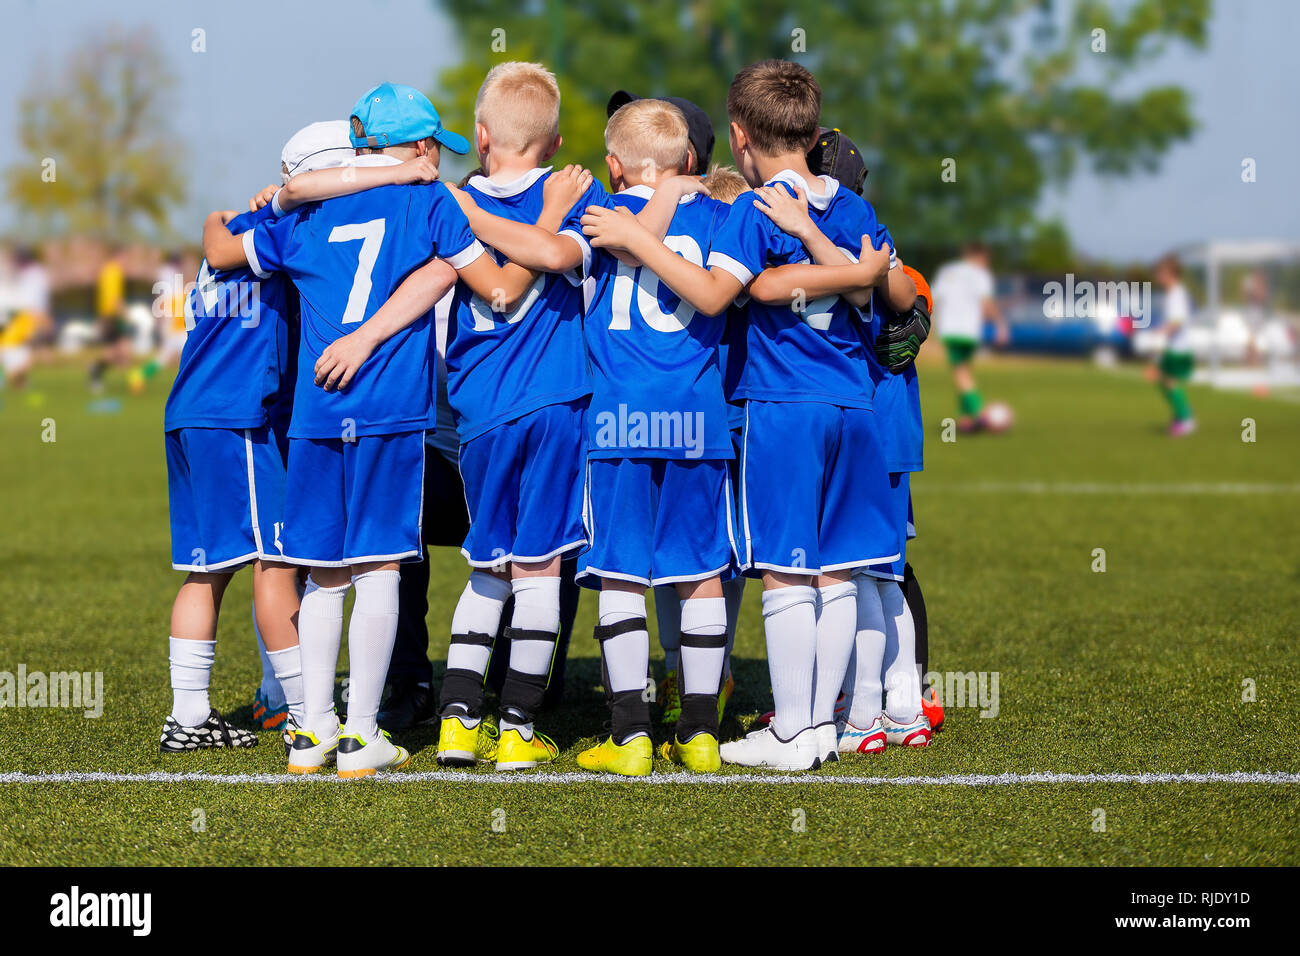 Kids Sport Team Gathering. Children Play Sports. Boys in Sports Jersey Uniforms Having Shout Team. Coach Giving Young Soccer Team Instructions. Youth  Stock Photo